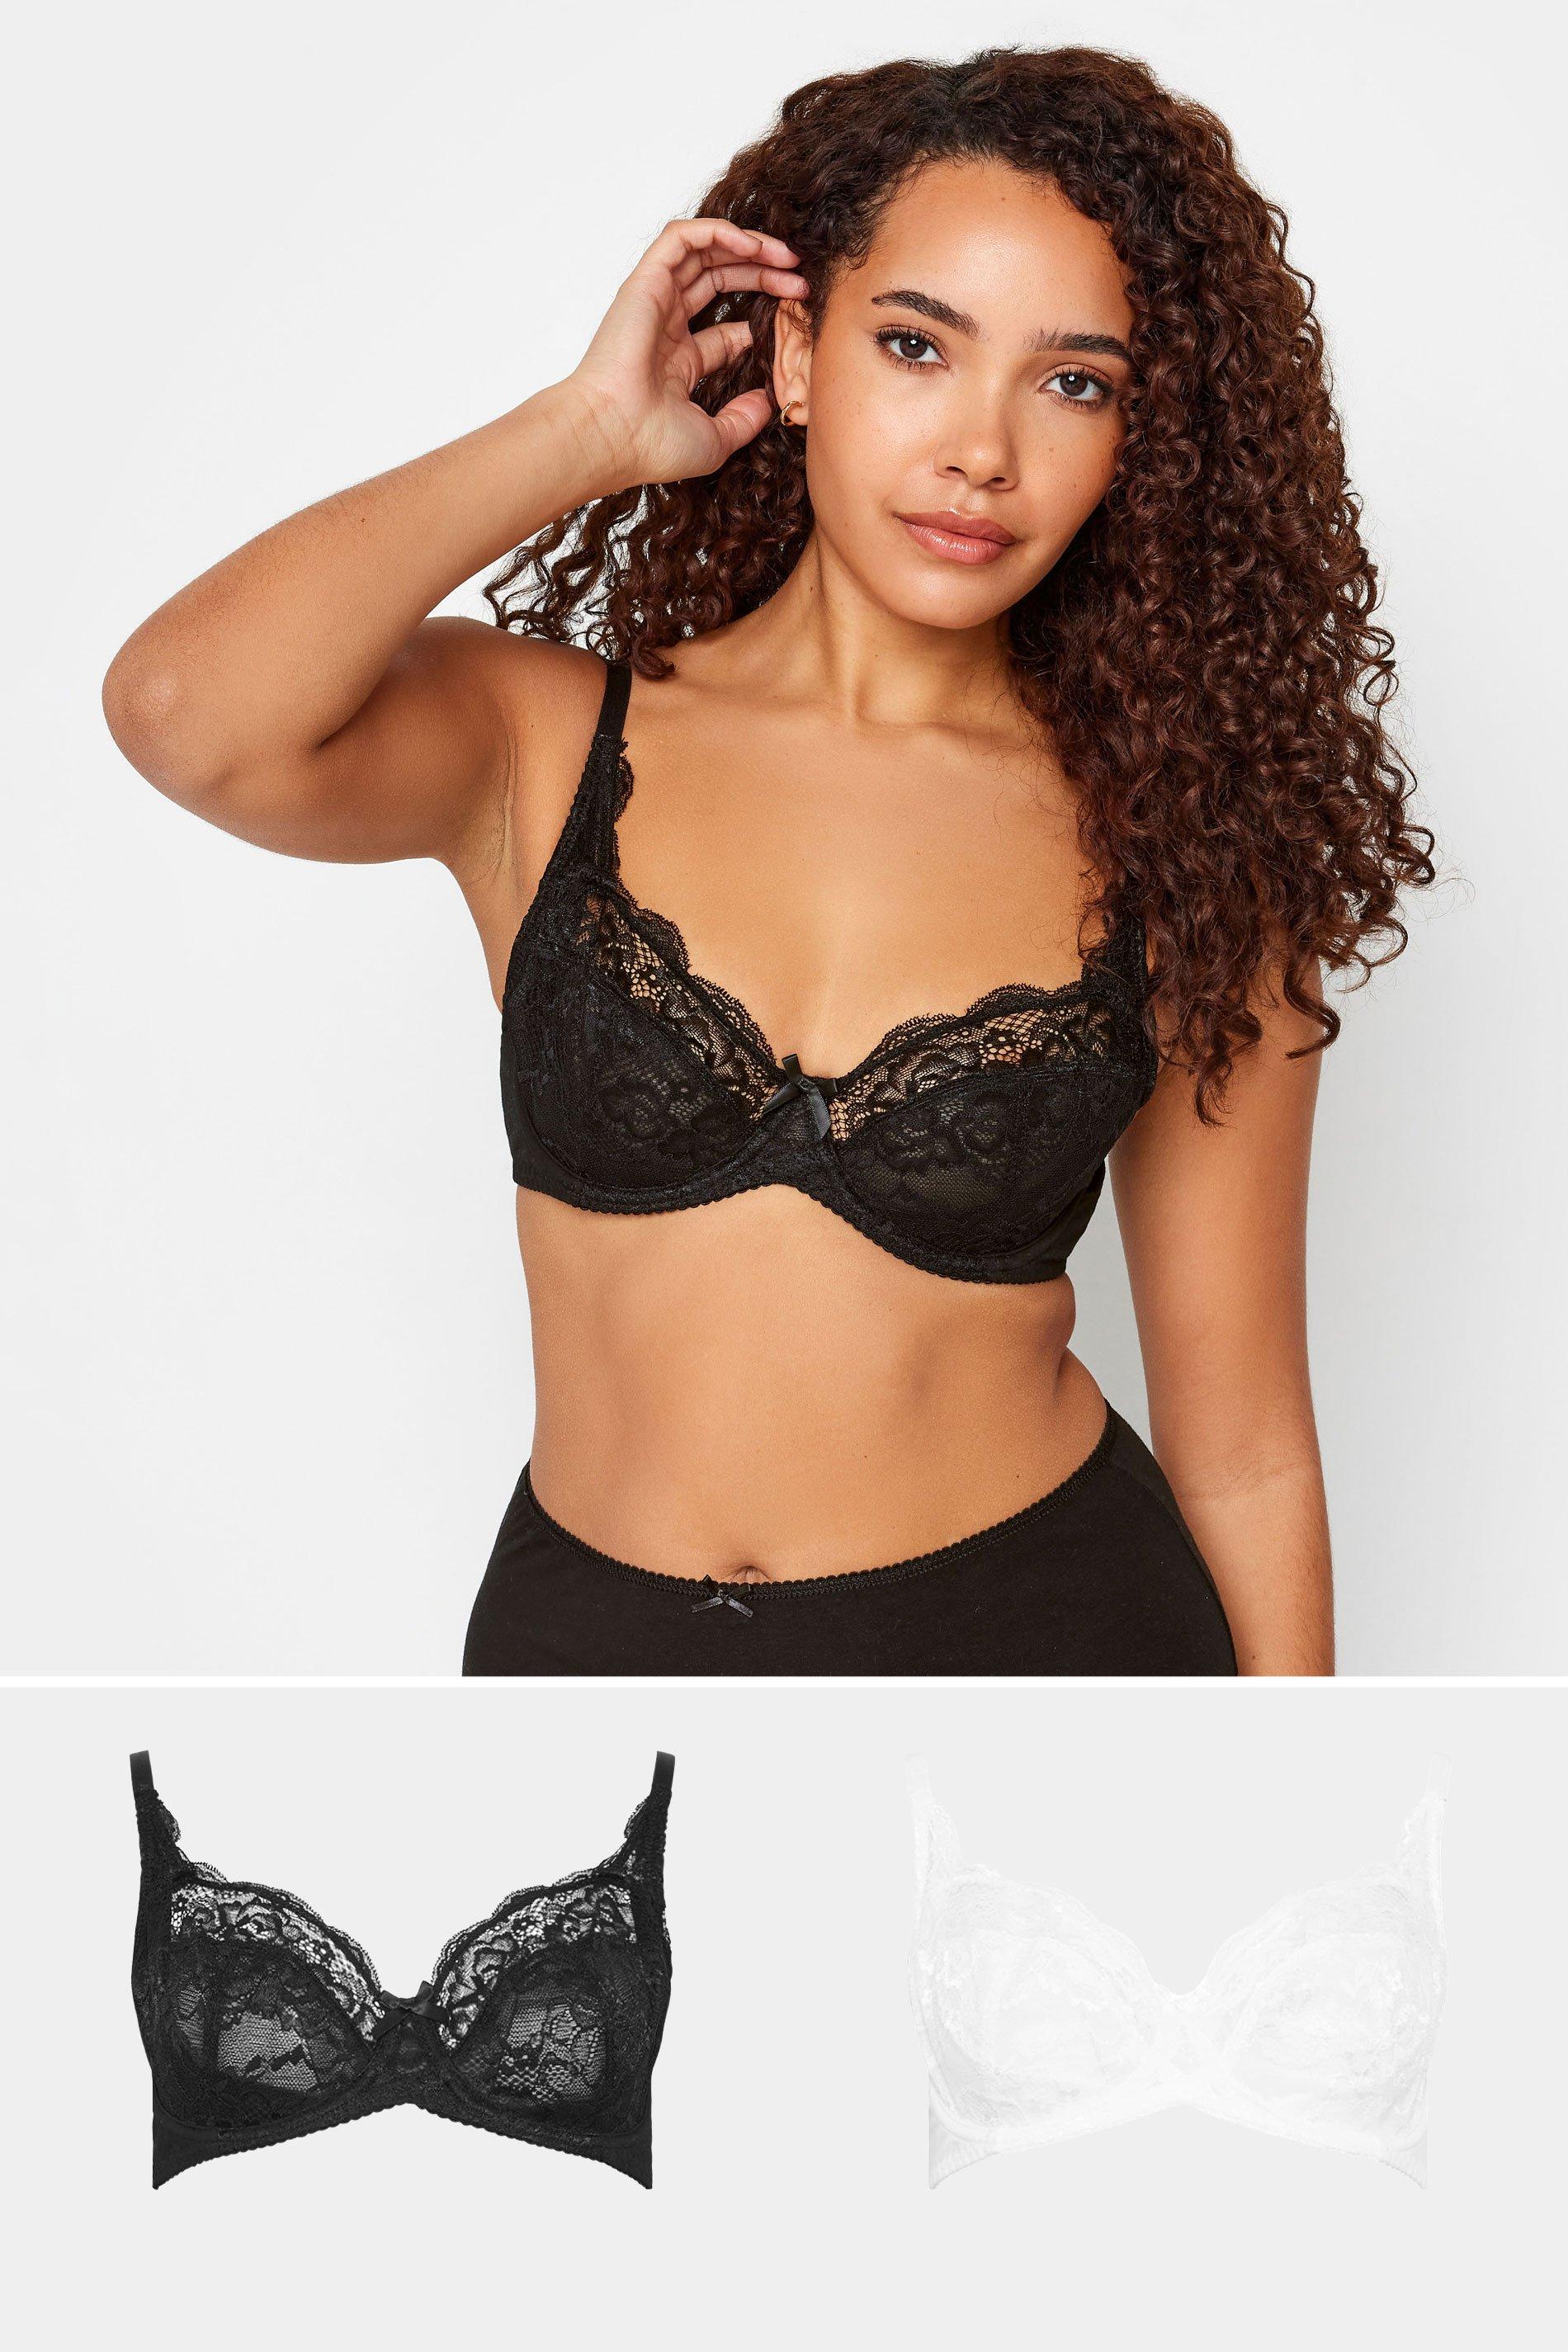 M&Co White Lace Non-Padded Floral Bra